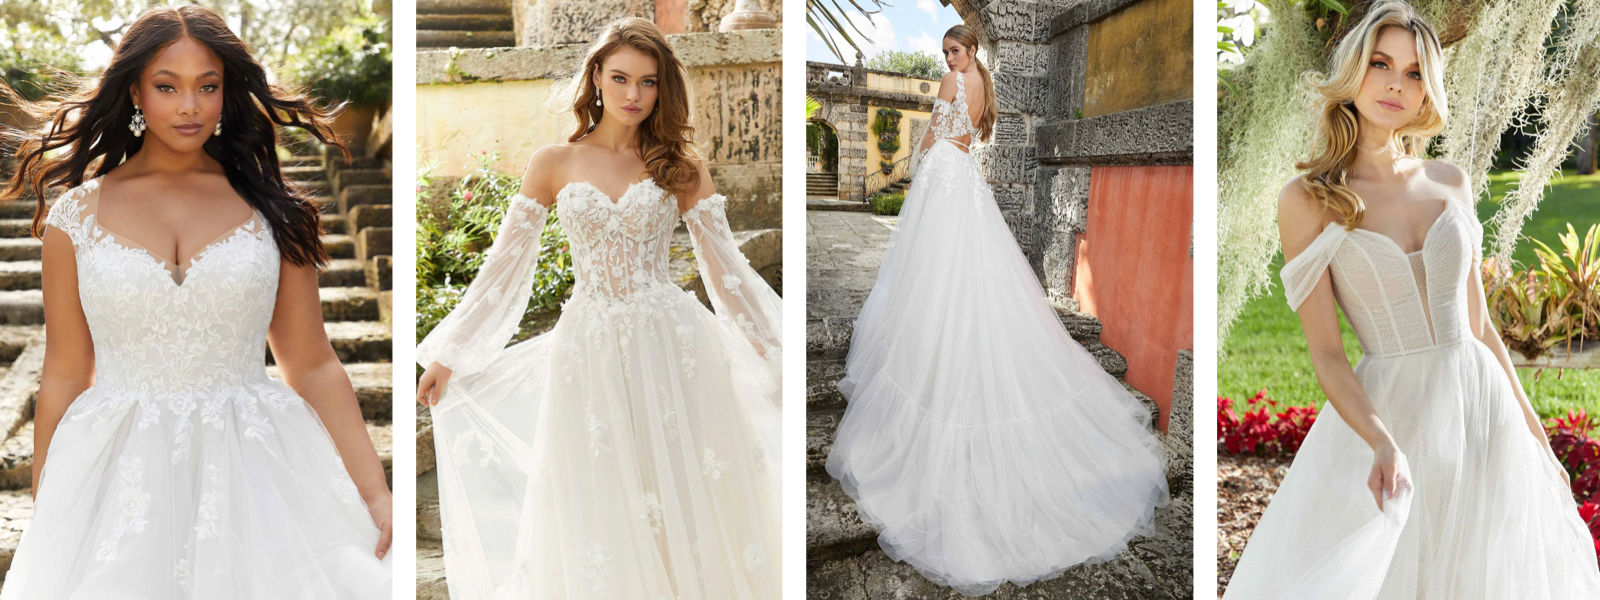 Madeline Gardner for Morilee Bridal Gowns Wedding Dresses Chattanooga Hixson Shops Boutiques Tennessee TN Georgia GA MSRP Lowest Prices Sale Discount A-Line Fit-And-Flare Mermaid Sheath ball trumpet Empire Sweetheart illusion strapless halter v-neck